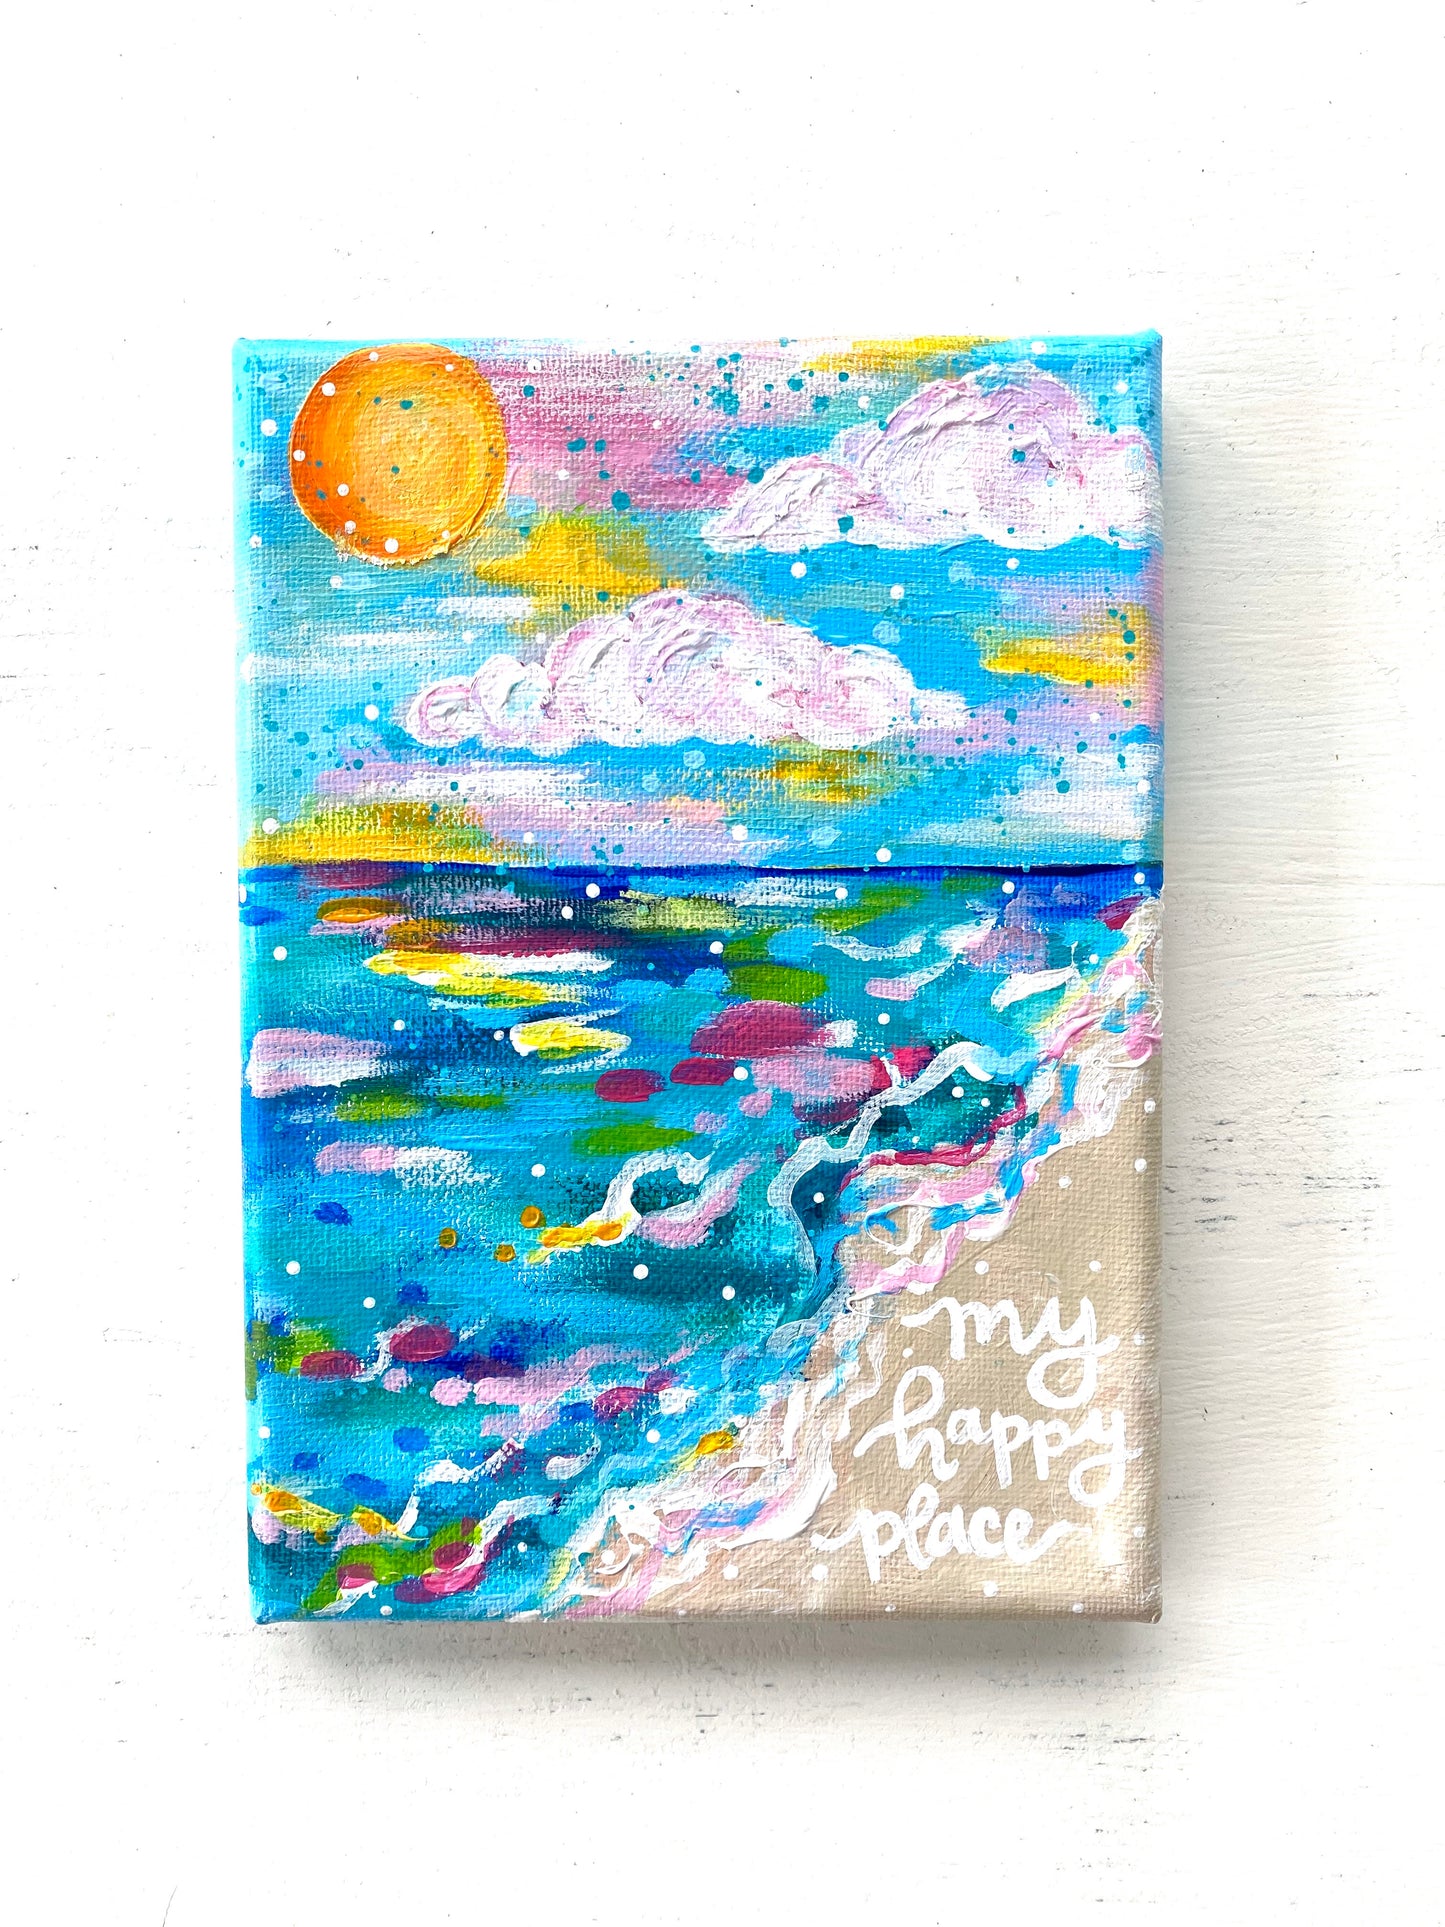 “My Happy Place” 5x7 inch Original Coastal Inspired Painting on Canvas with painted sides